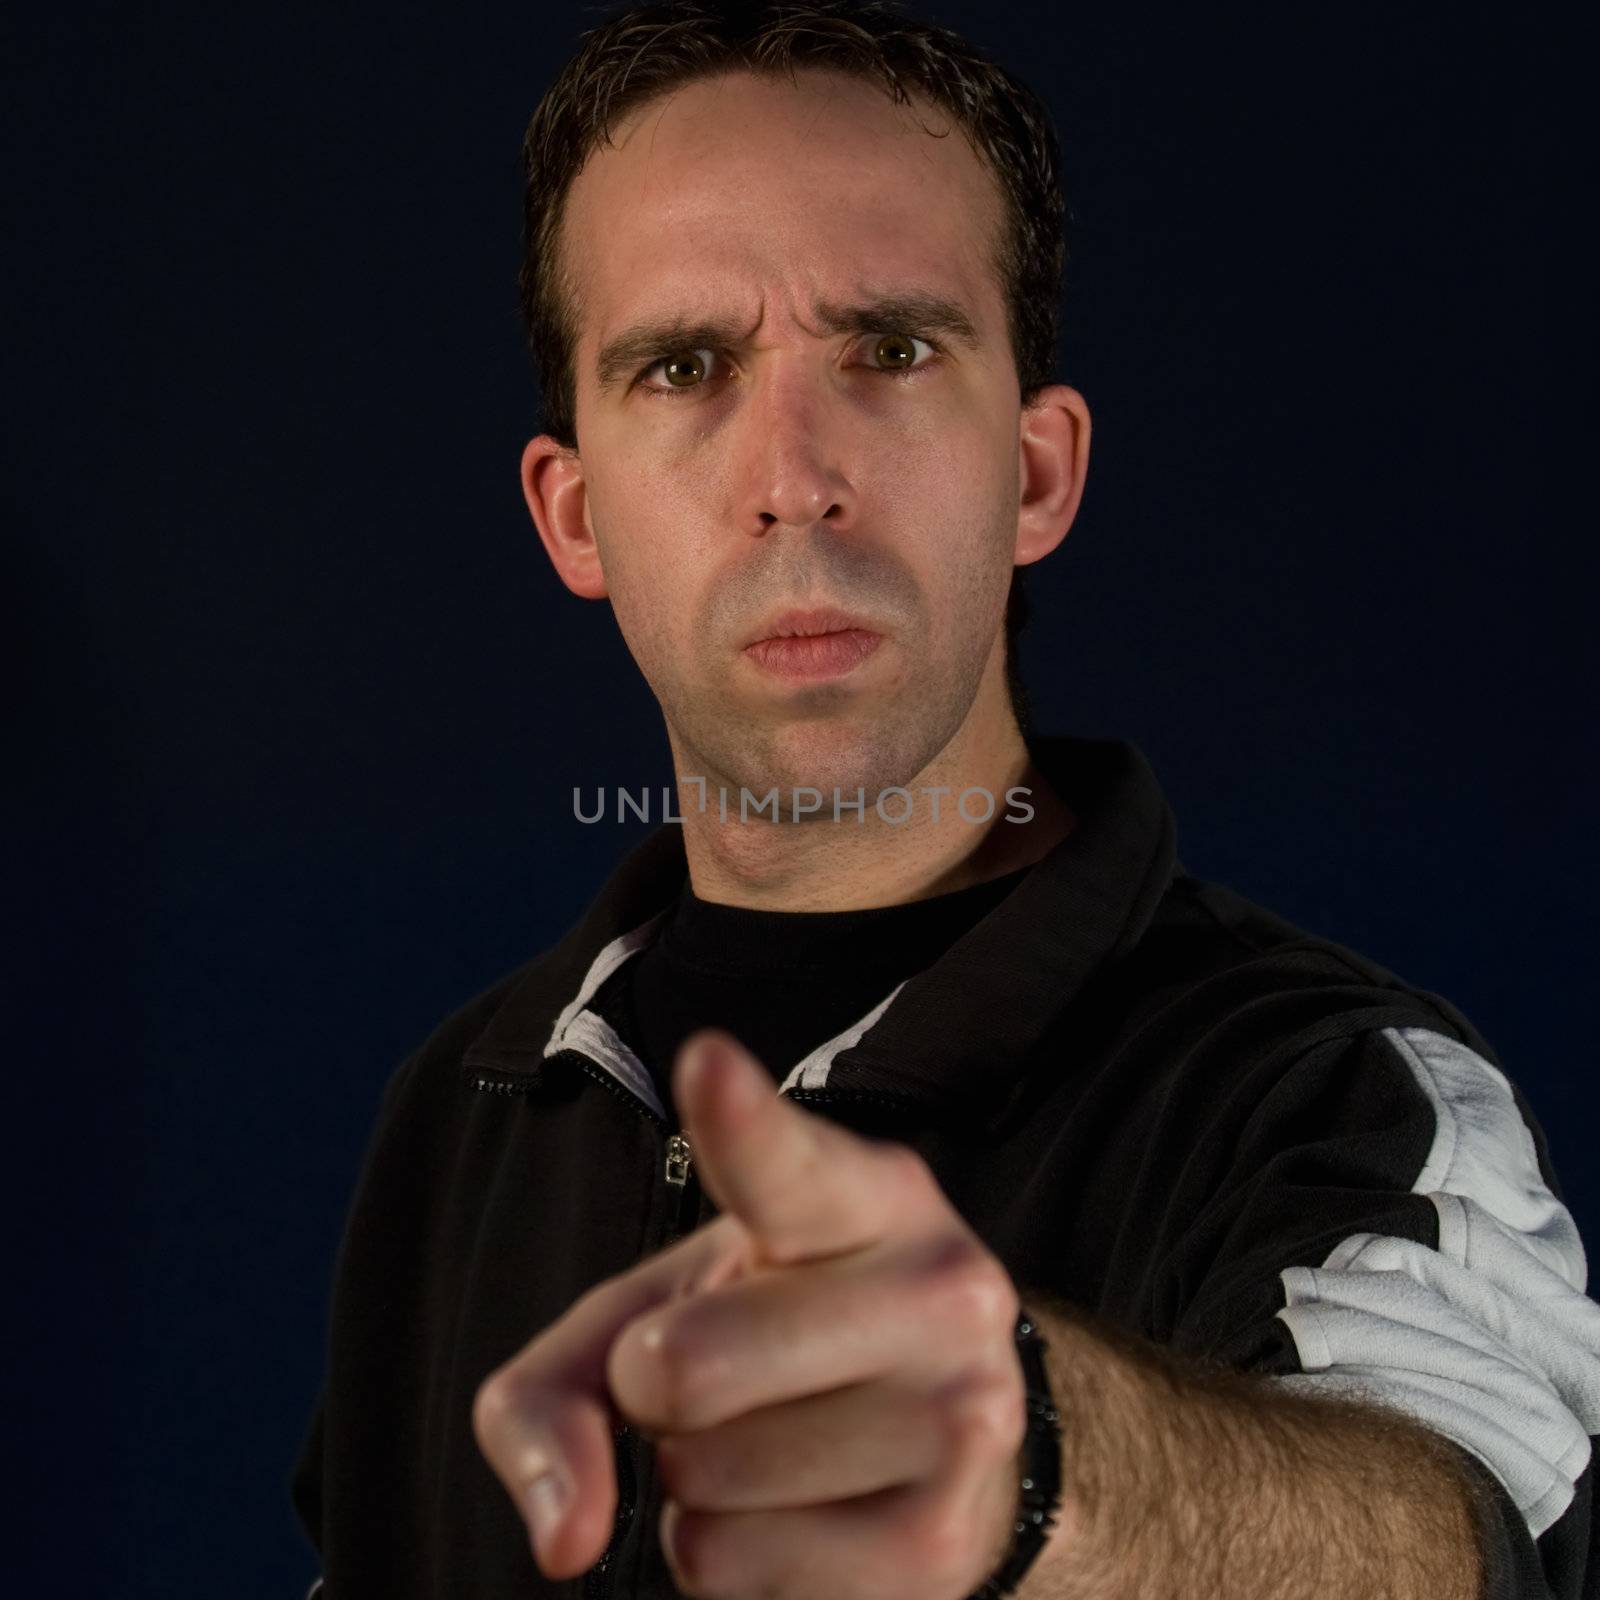 An angry man with a mad expression on his face, pointing his finger at the camera